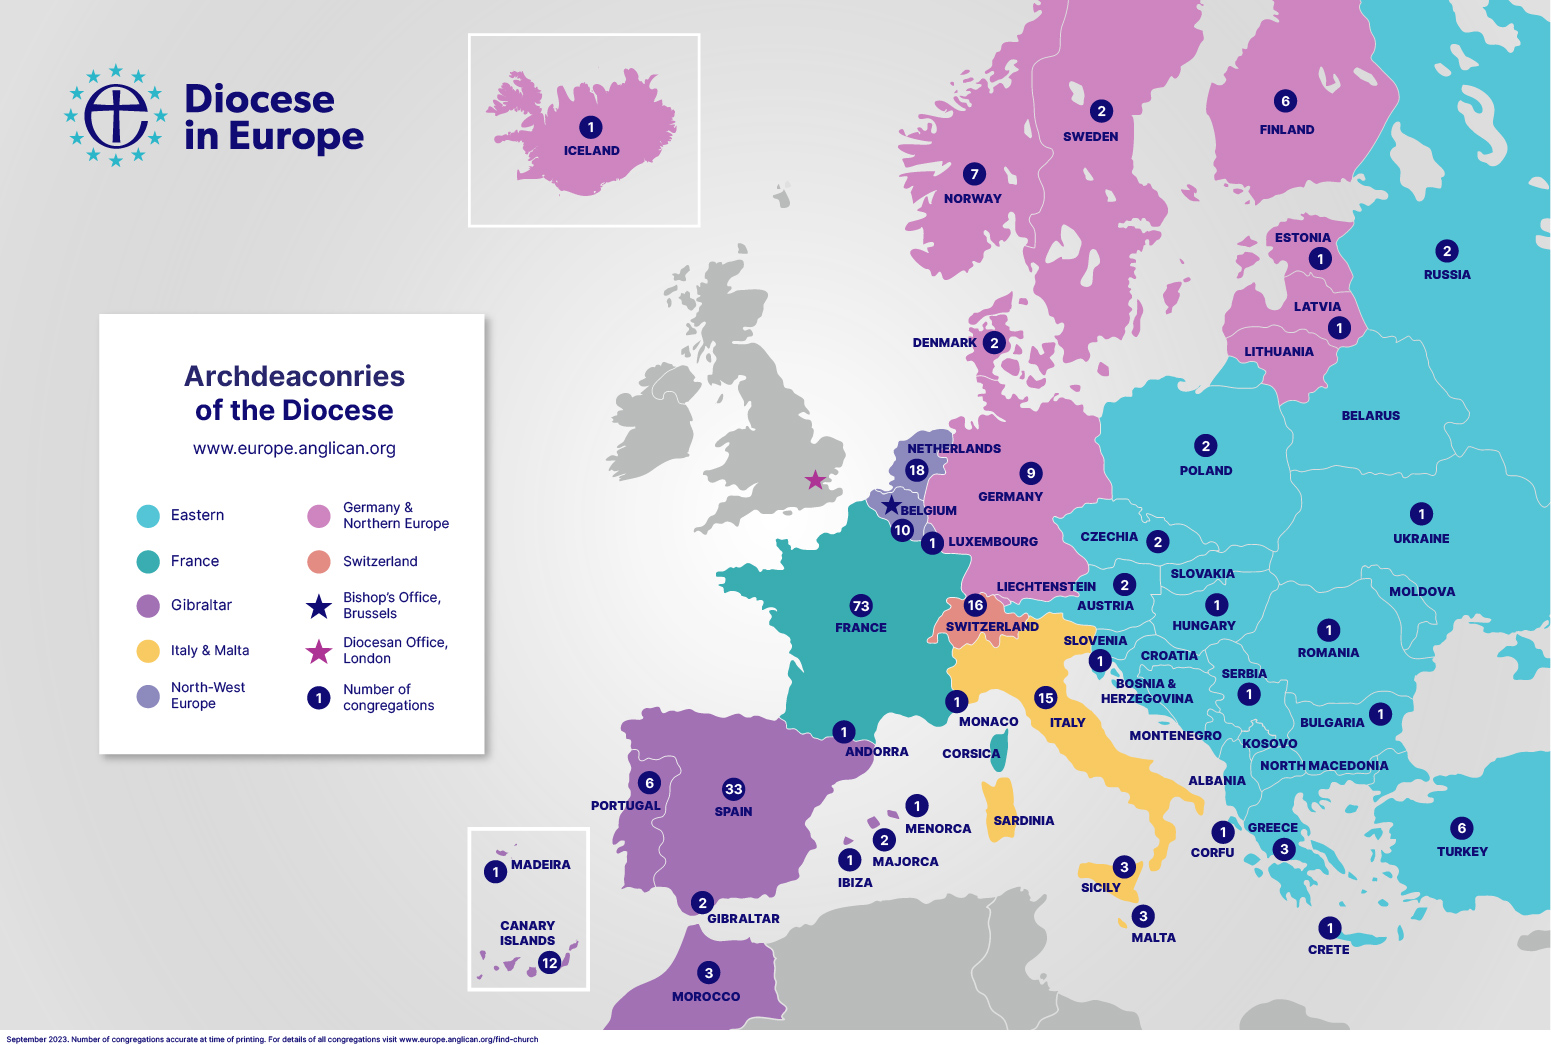 Colour coded map of the archdeaconries of the Diocese in Europe